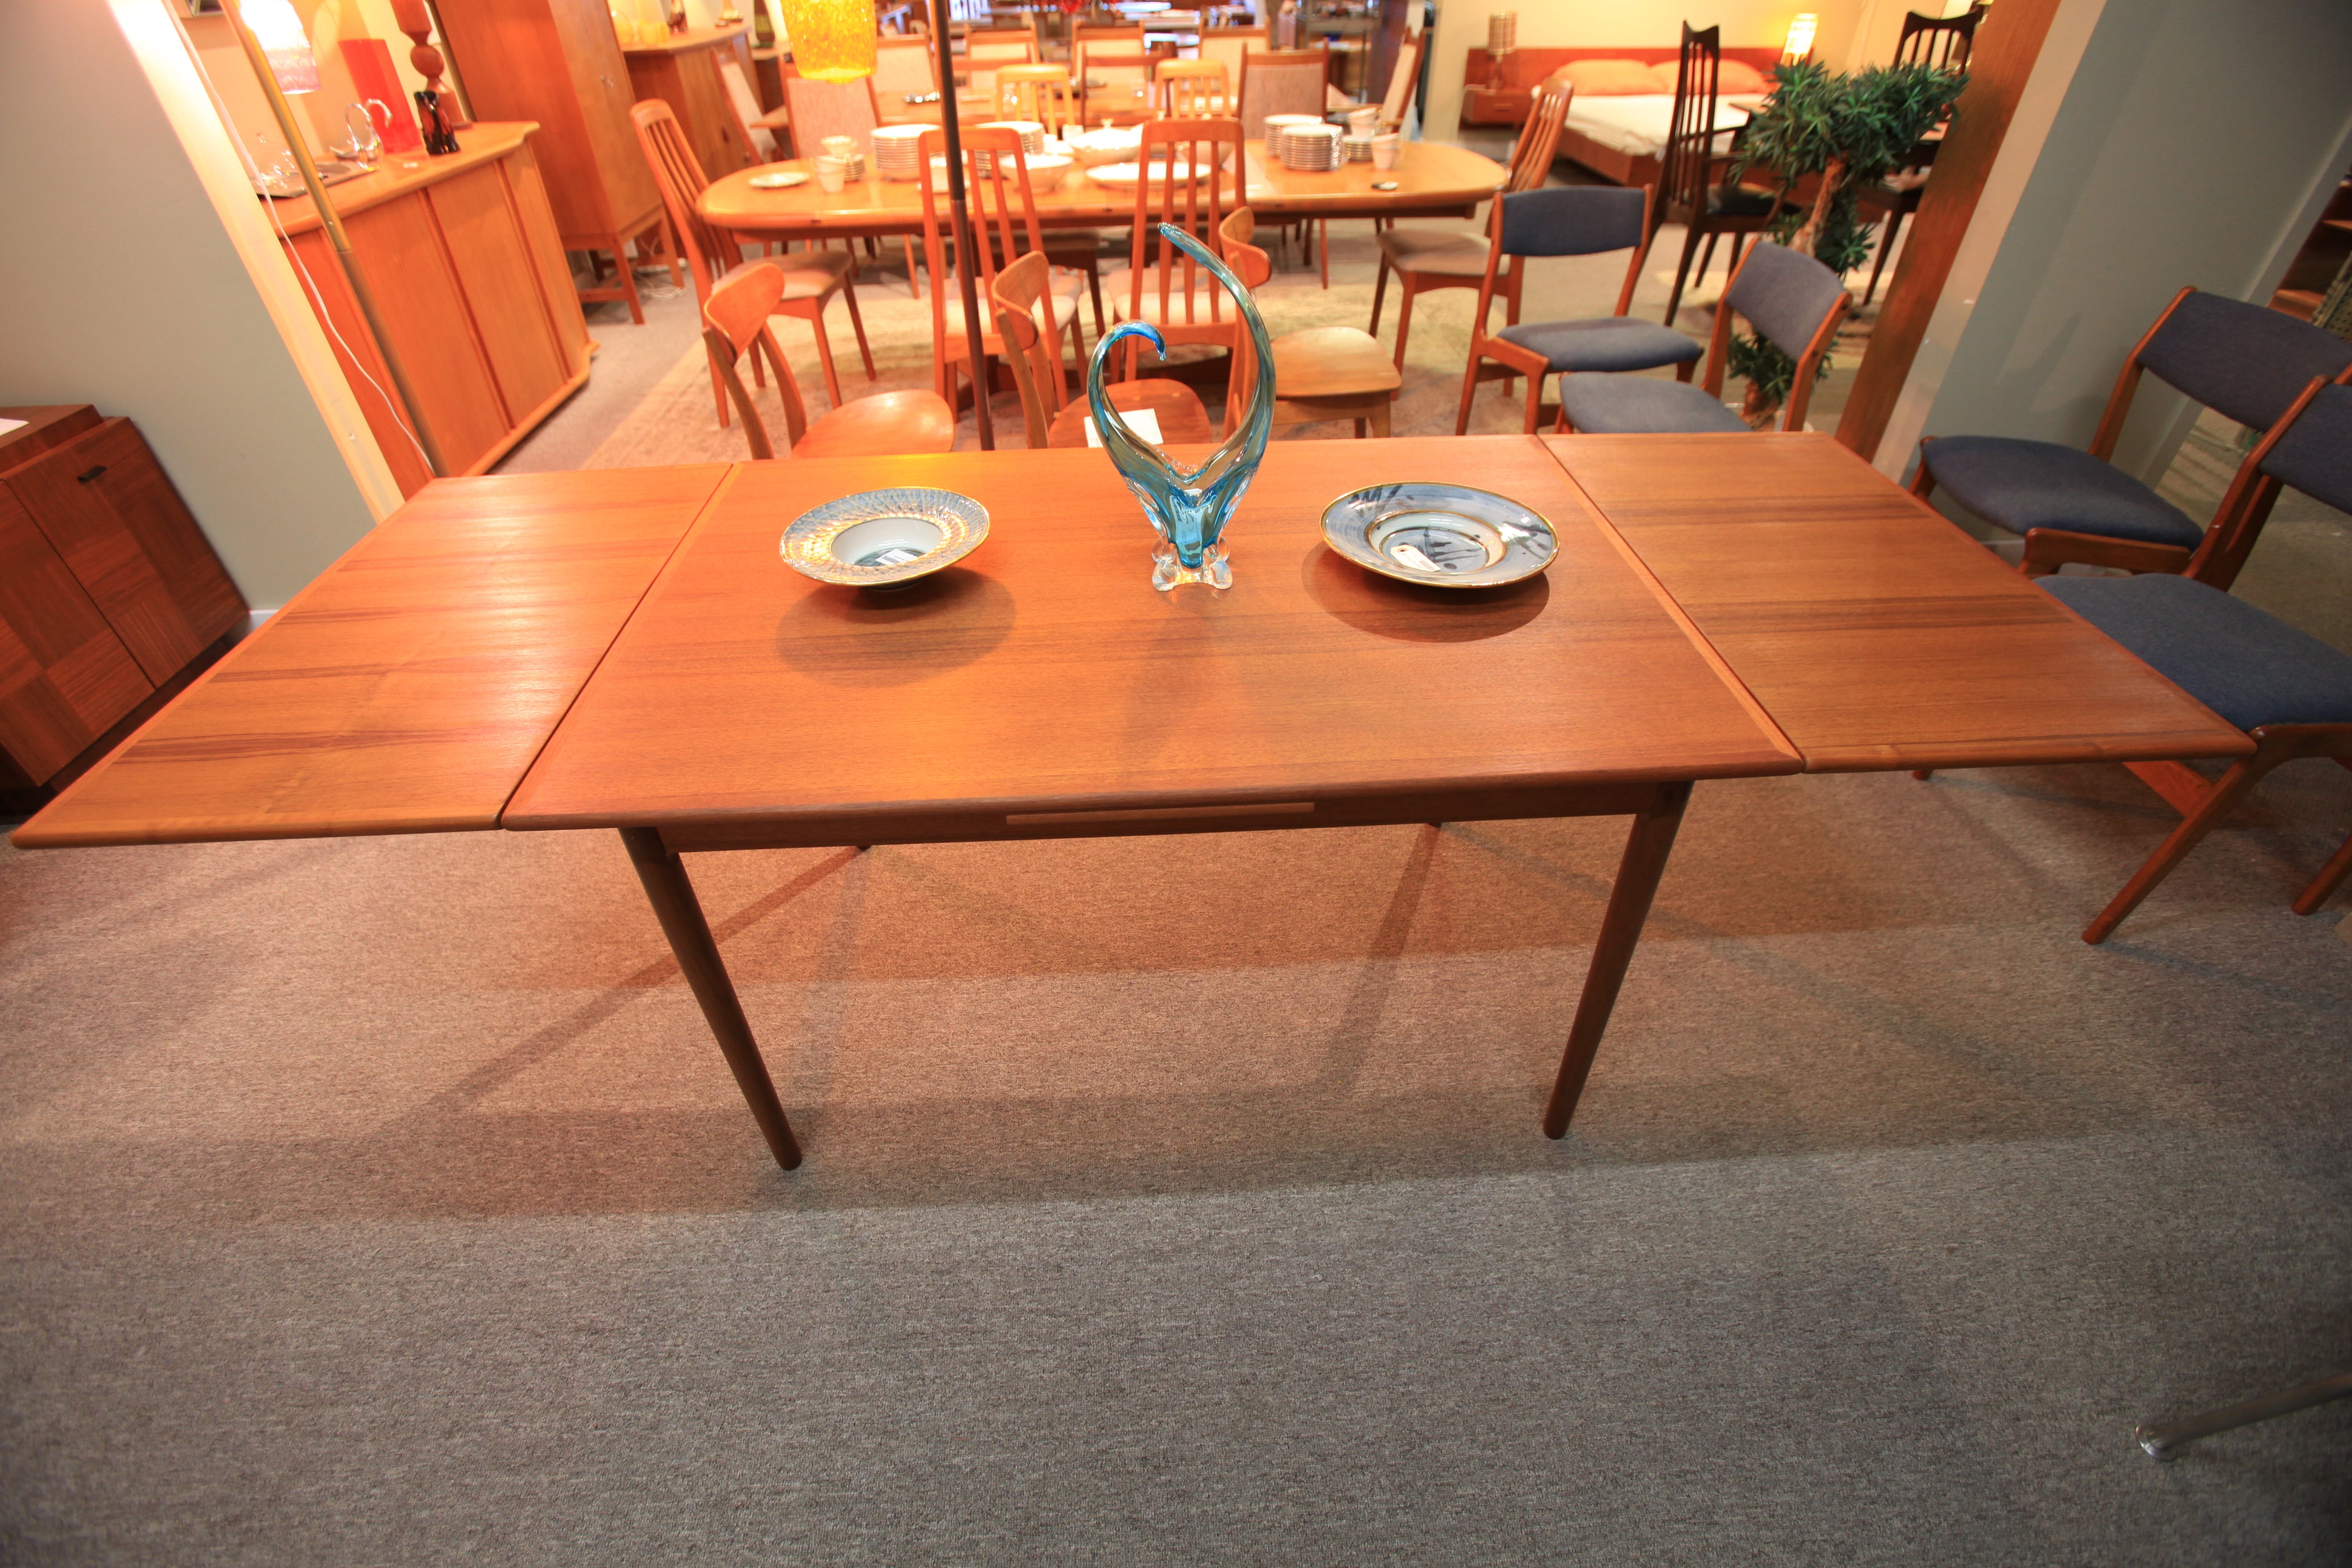 Vintage Danish Teak Dining Table w/ Pullout Extensions (85" x 32.5") or (48" x 32.5")